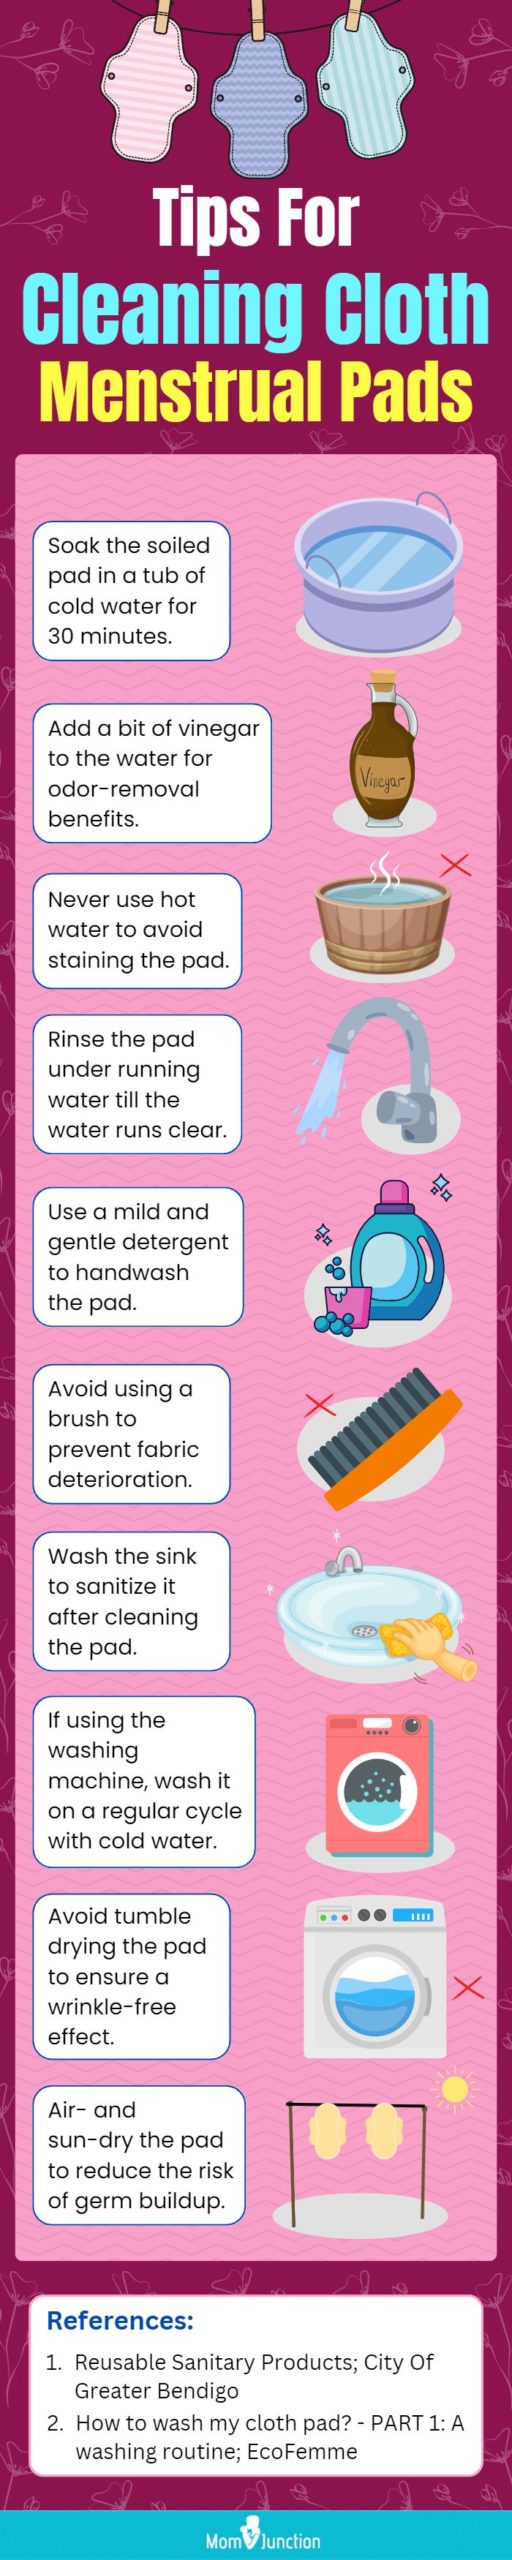 Tips For Cleaning Cloth Menstrual Pads (infographic)